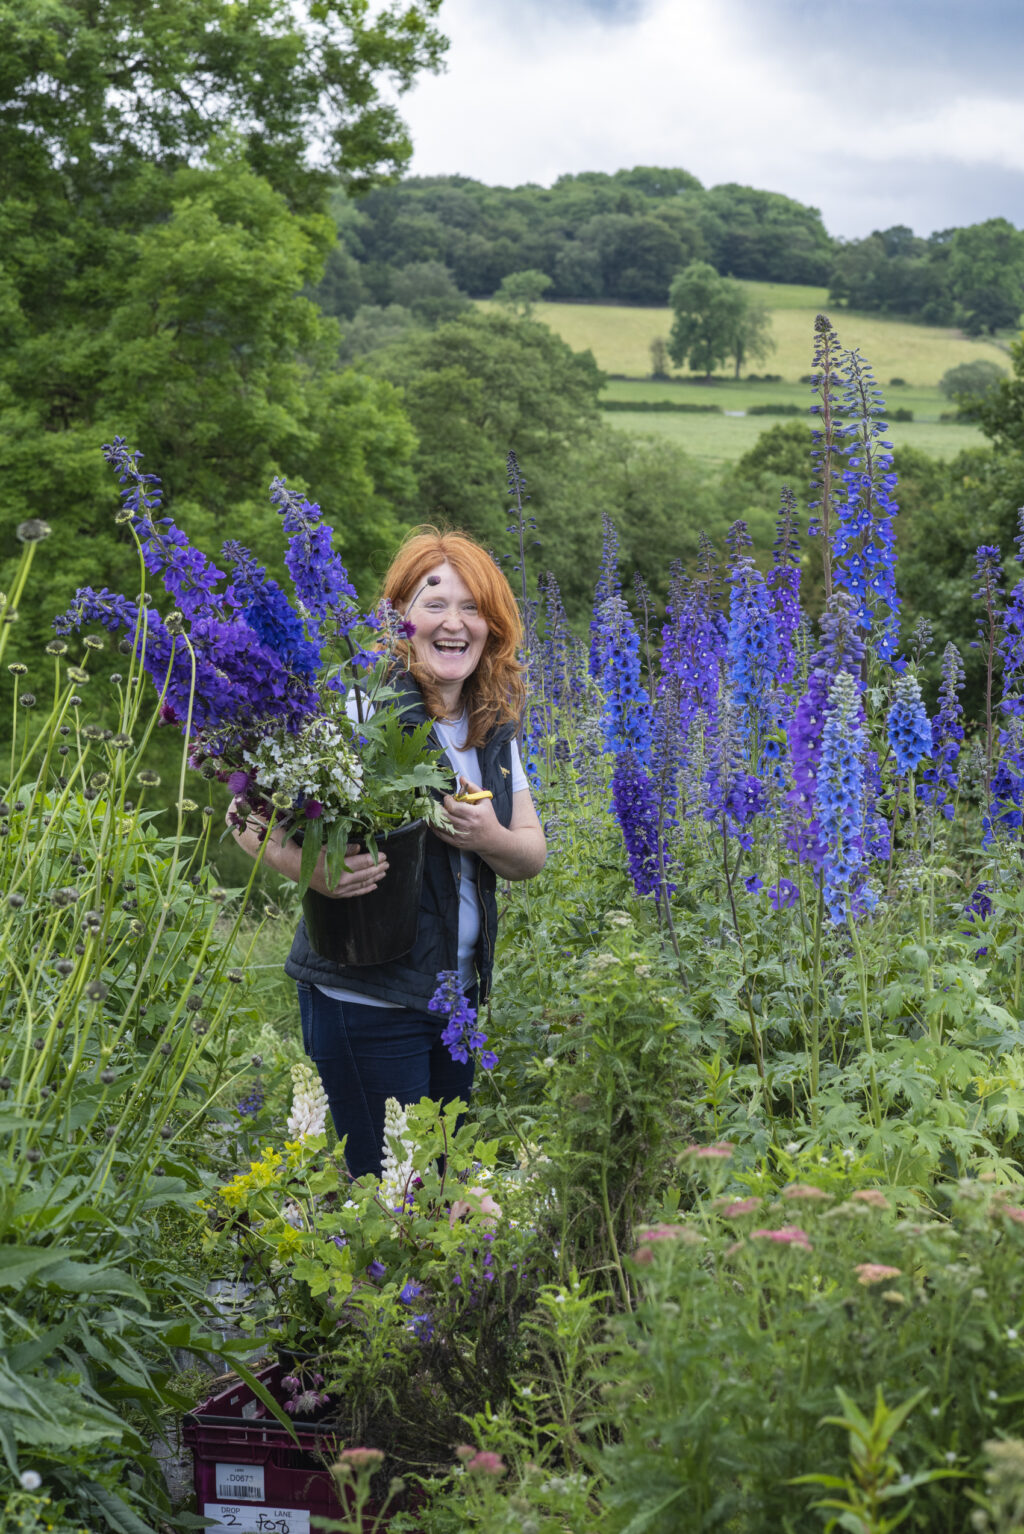 Pam of Quirky Flowers cuts buckets of towering blue delphiniums on her Staffordshire flower farm with the rolling hills of the local countryside in the background.